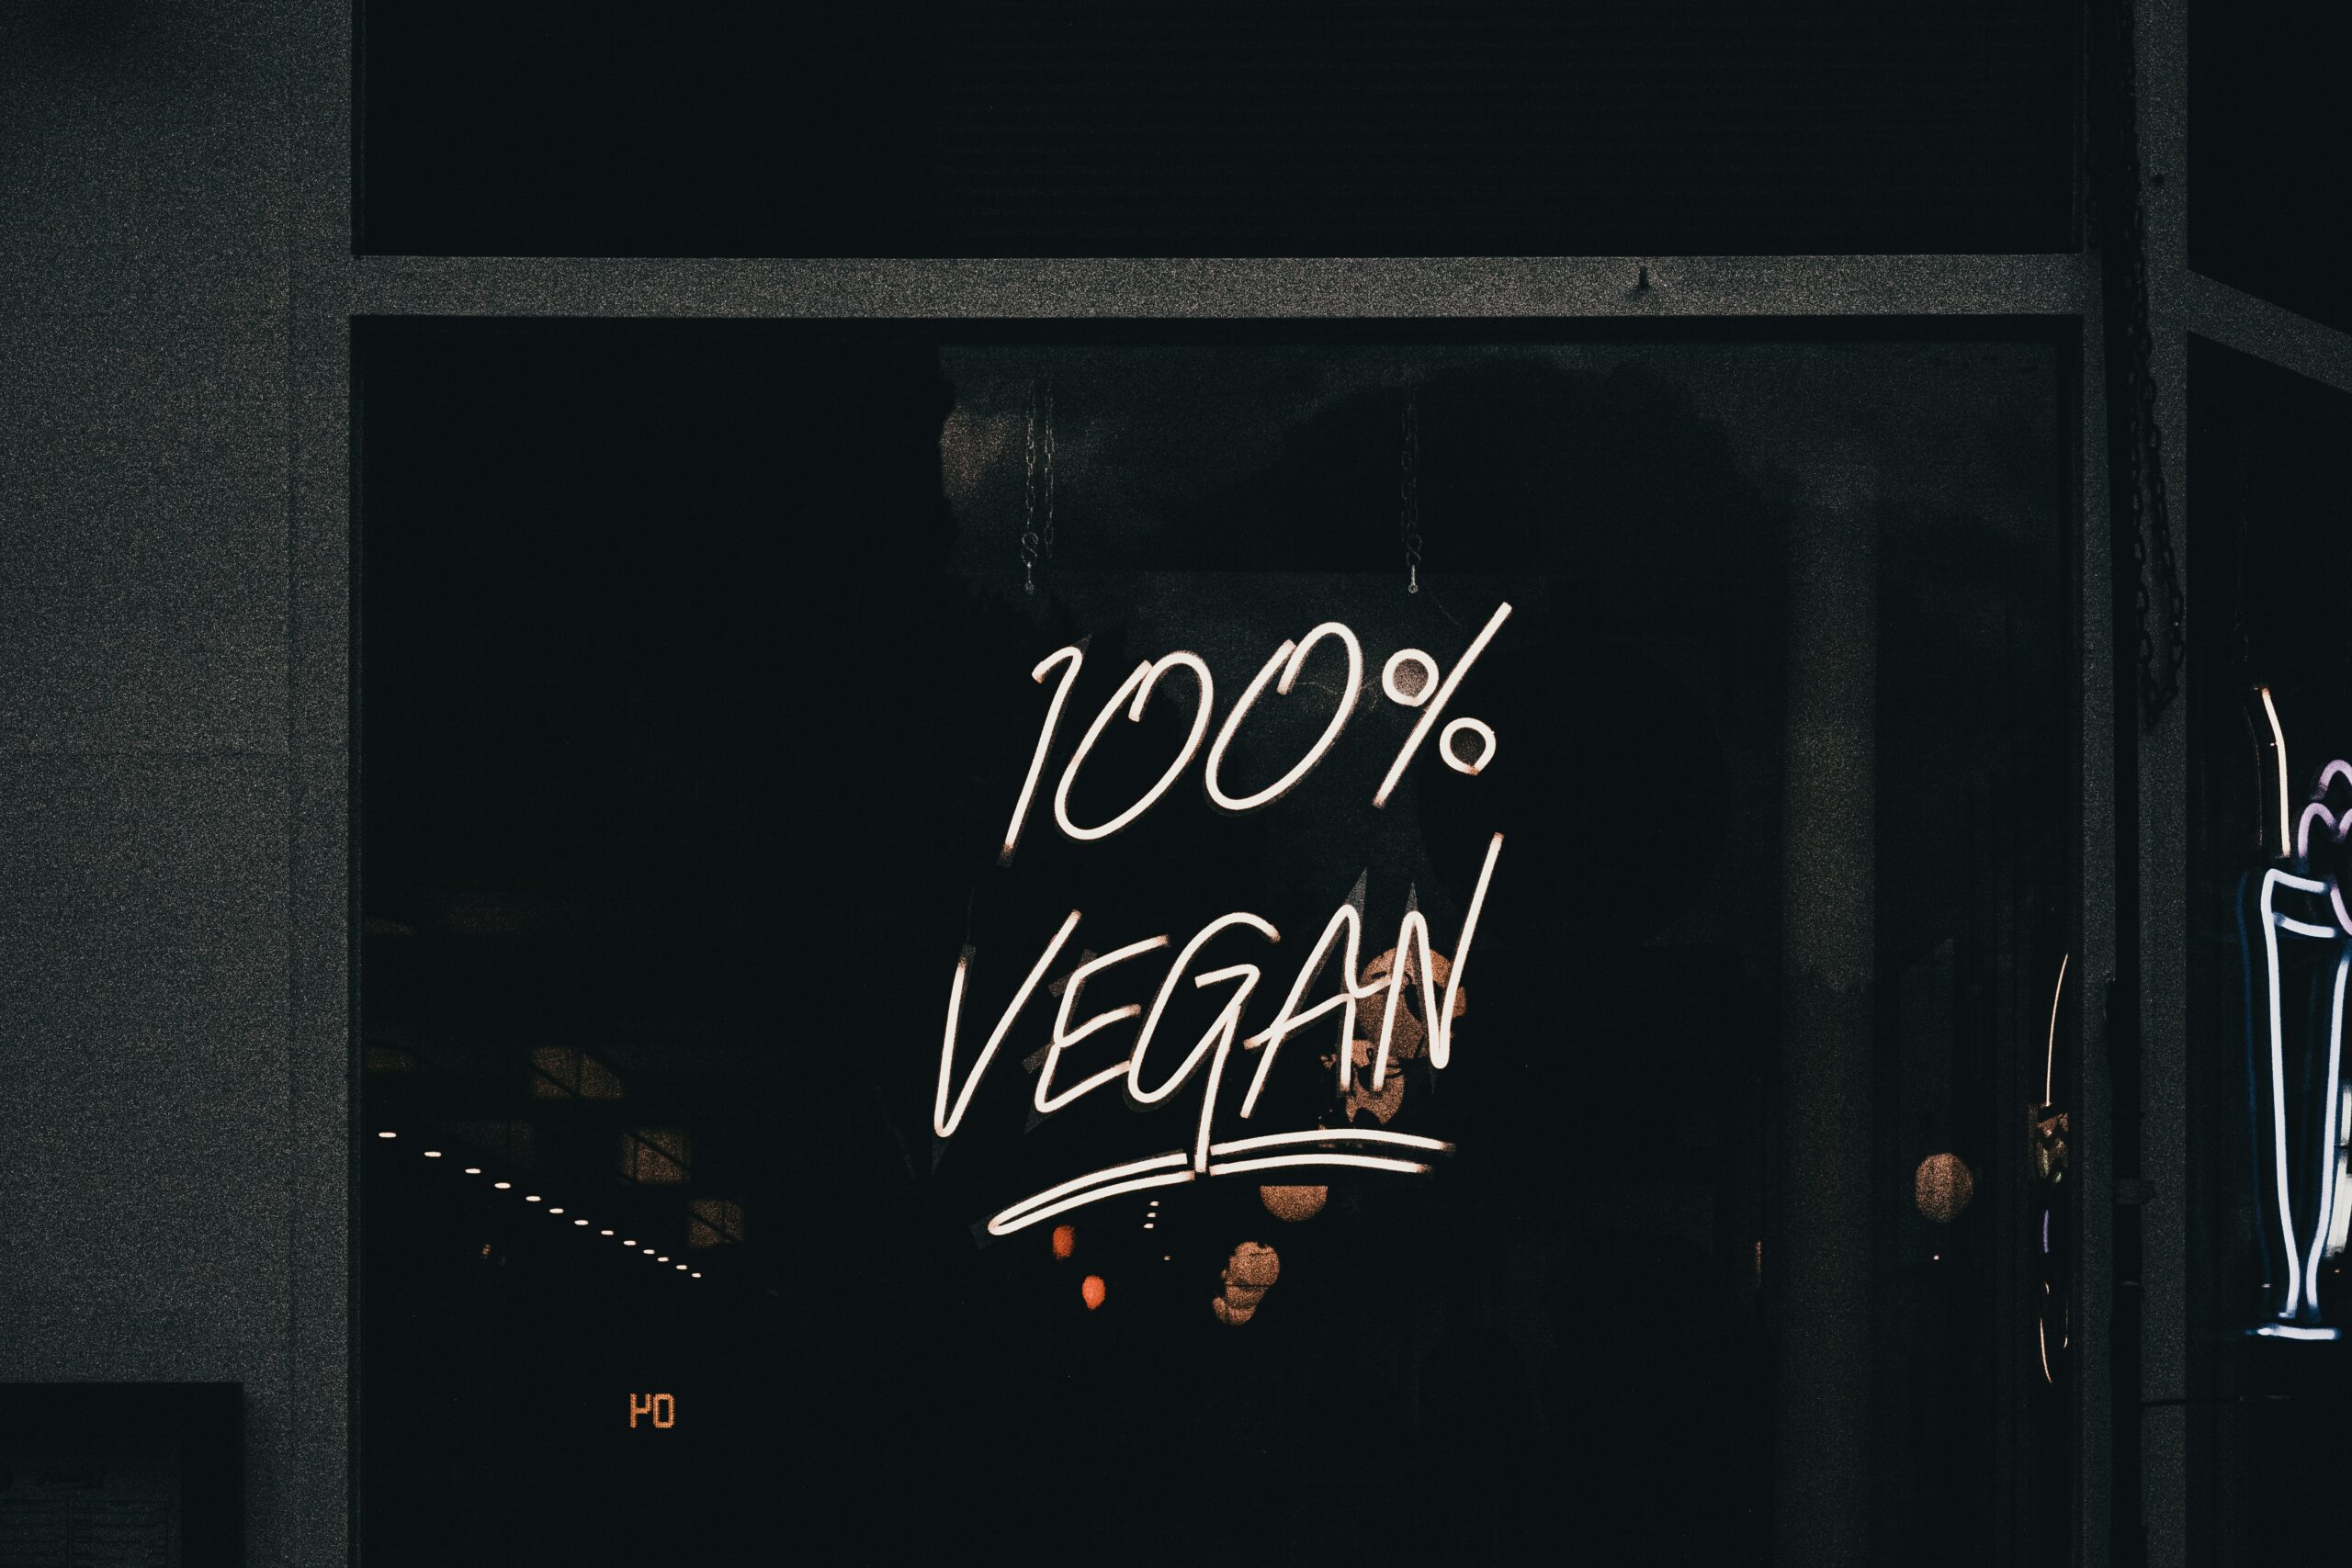 What to get a vegetarian and vegan?